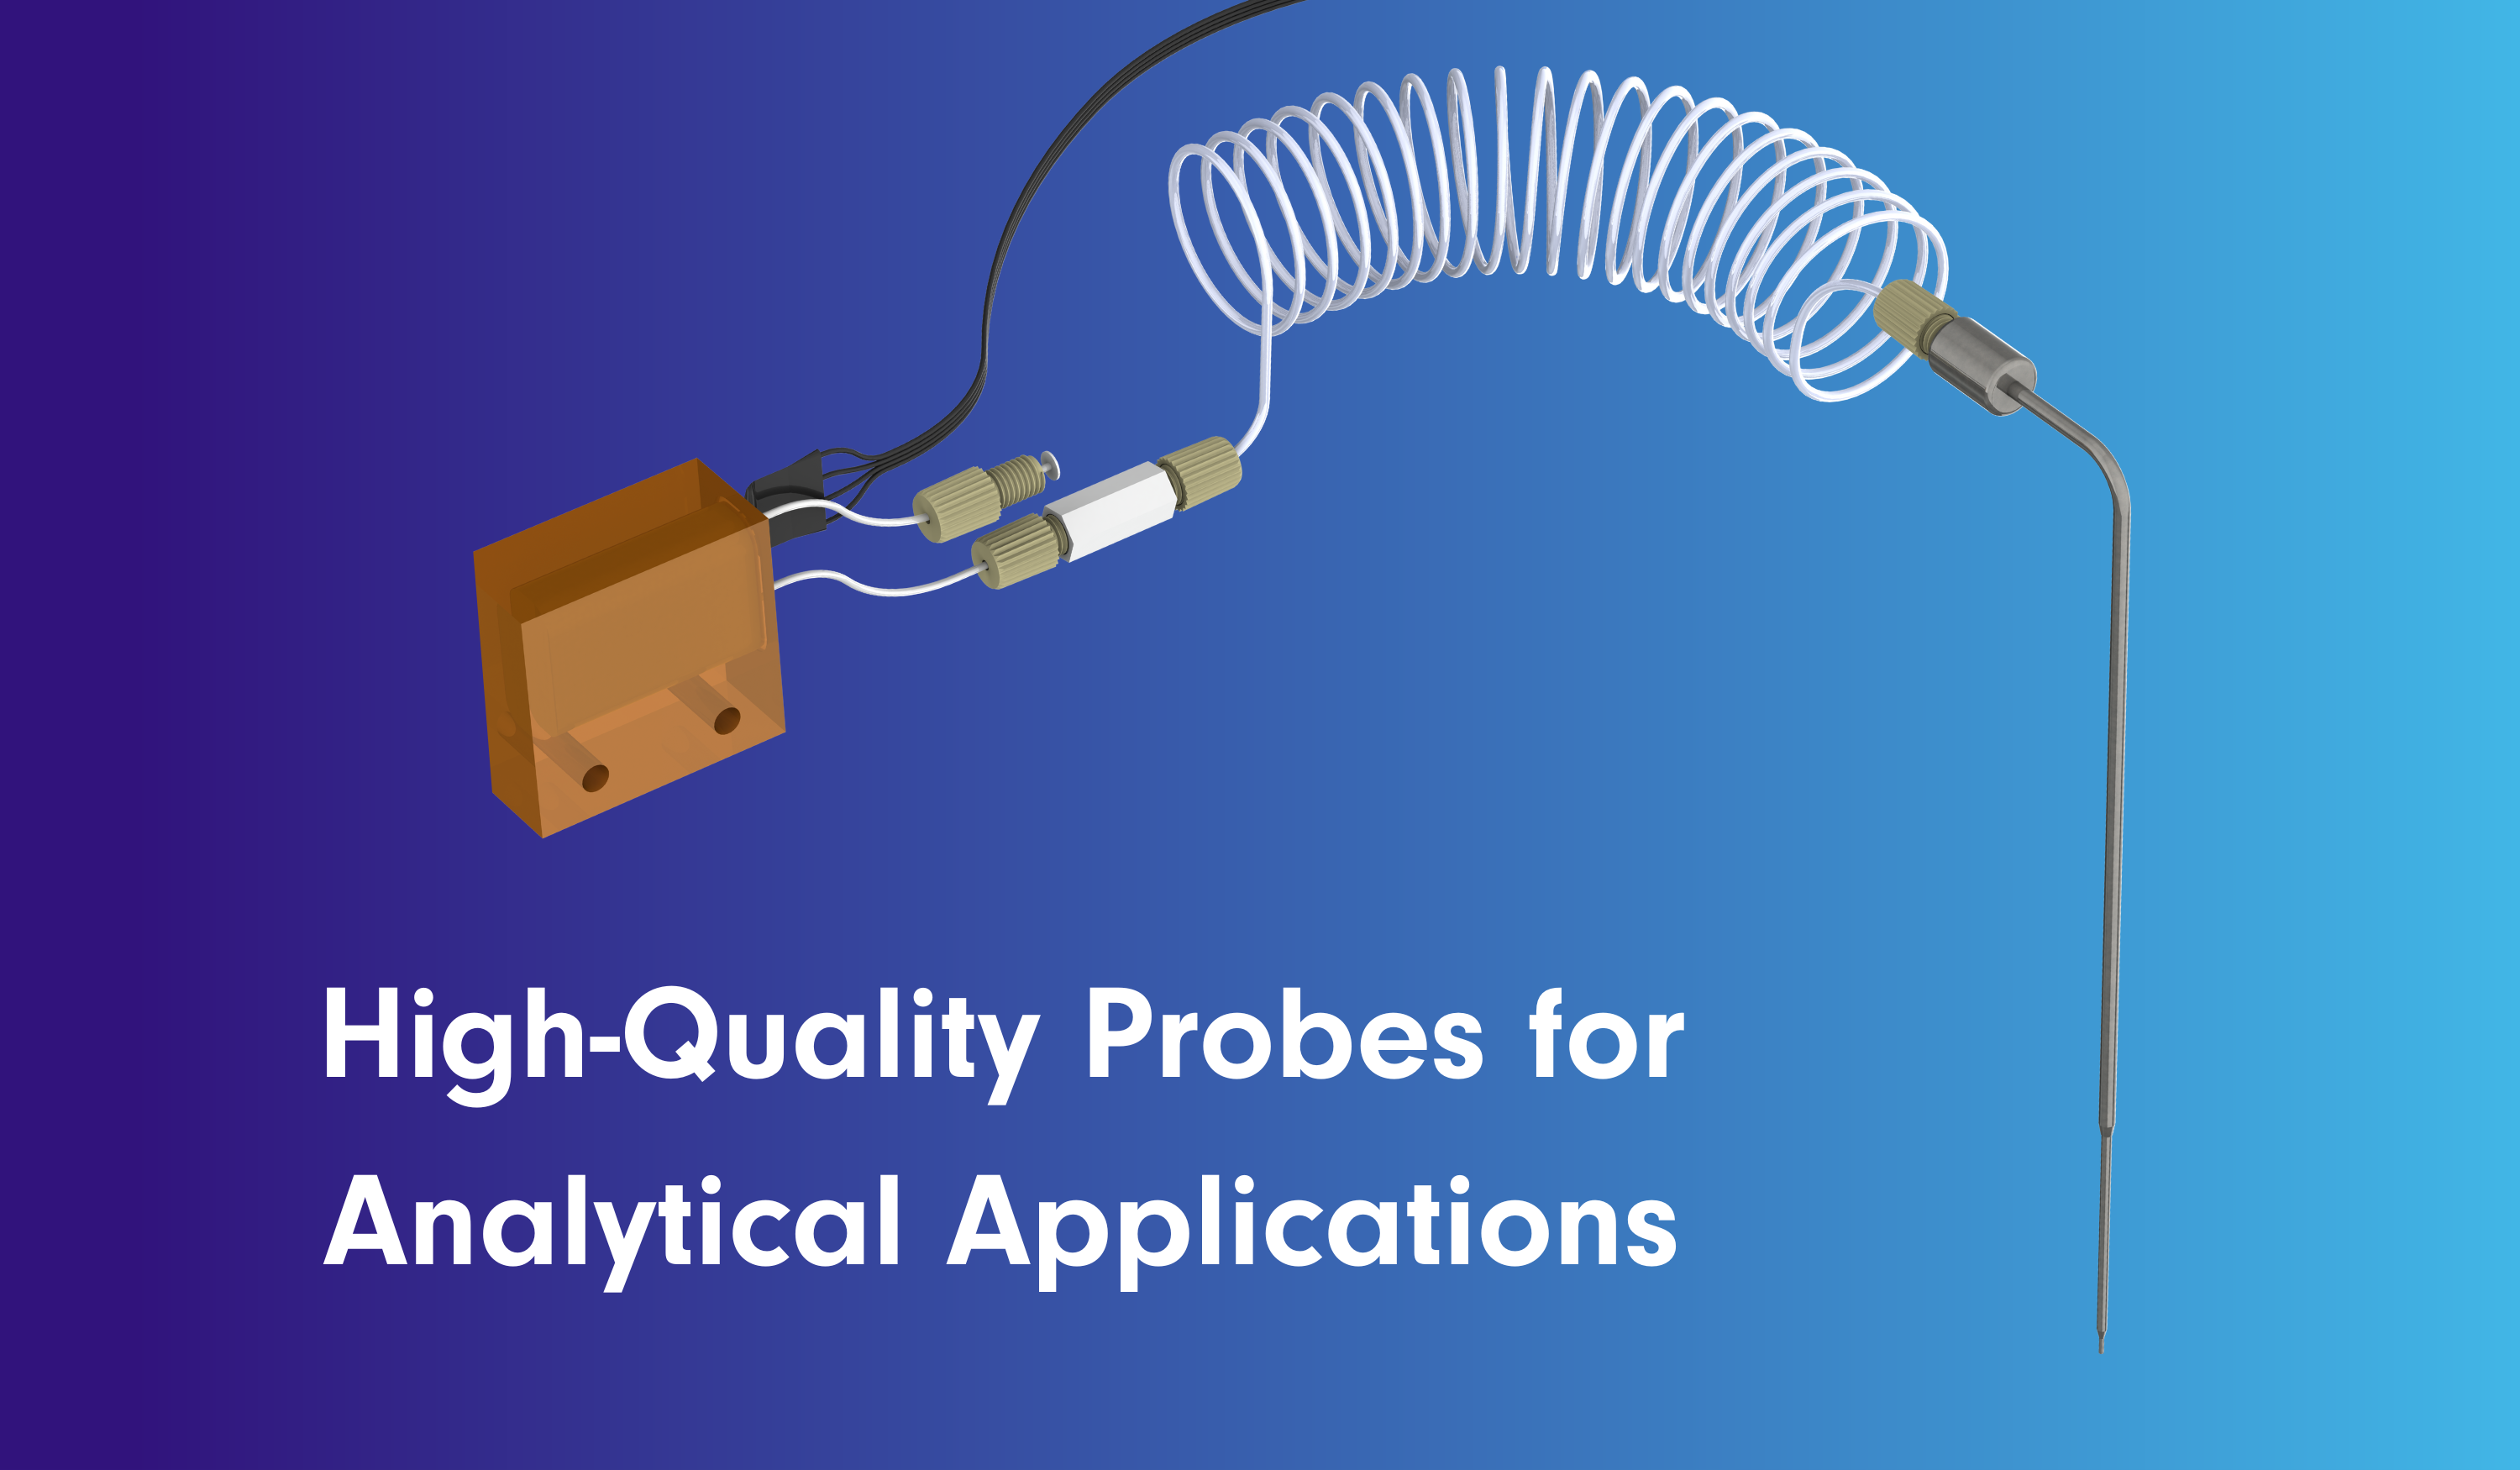 High-Quality Probes for Analytical Applications Image